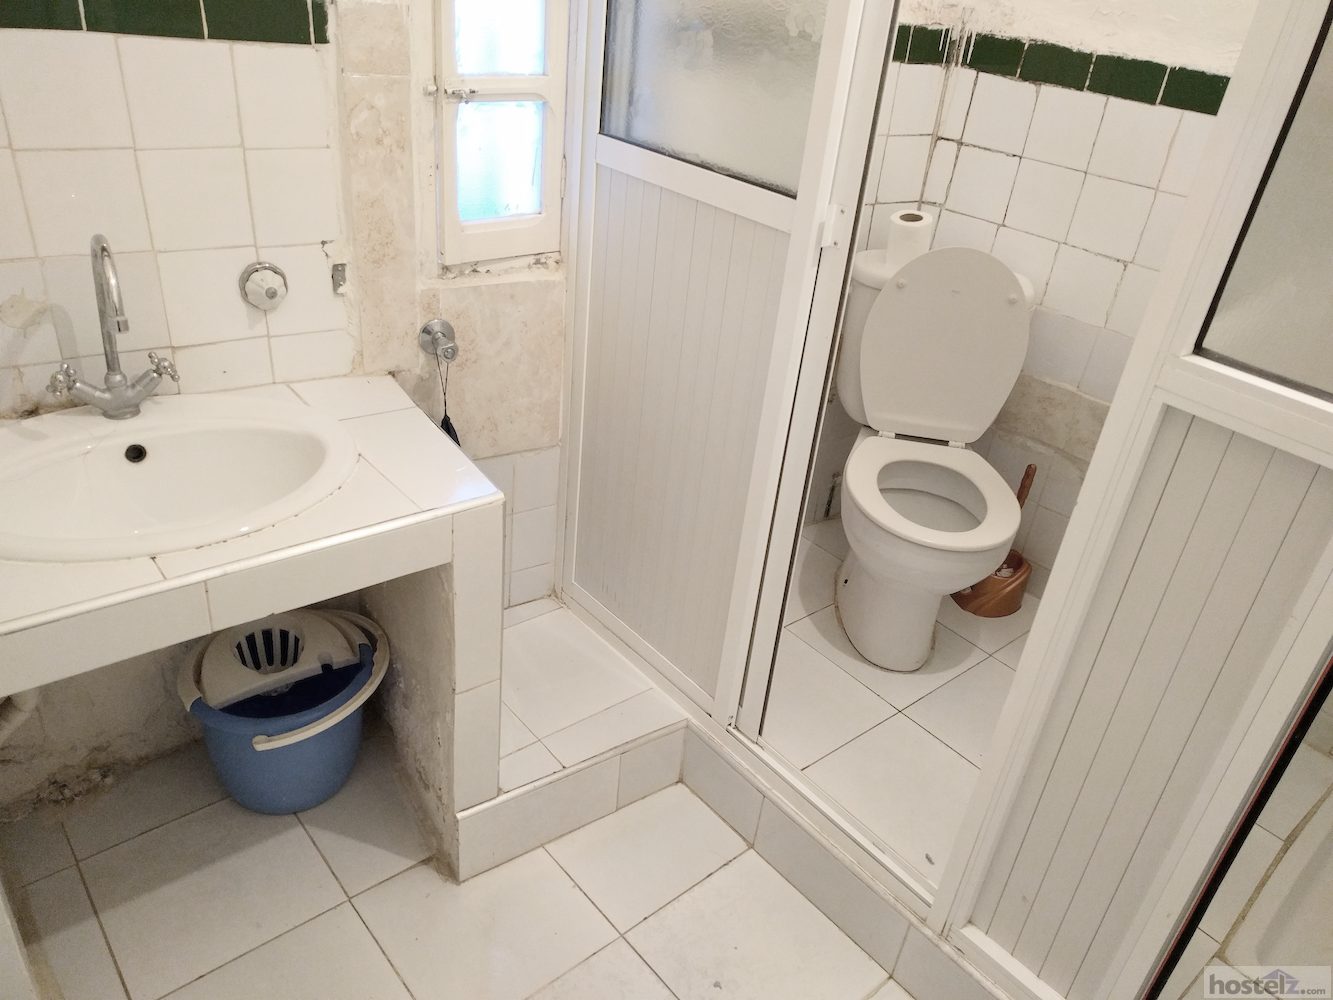 One of the bathrooms with a toilet and a shower, hooks, and plenty of room to change.